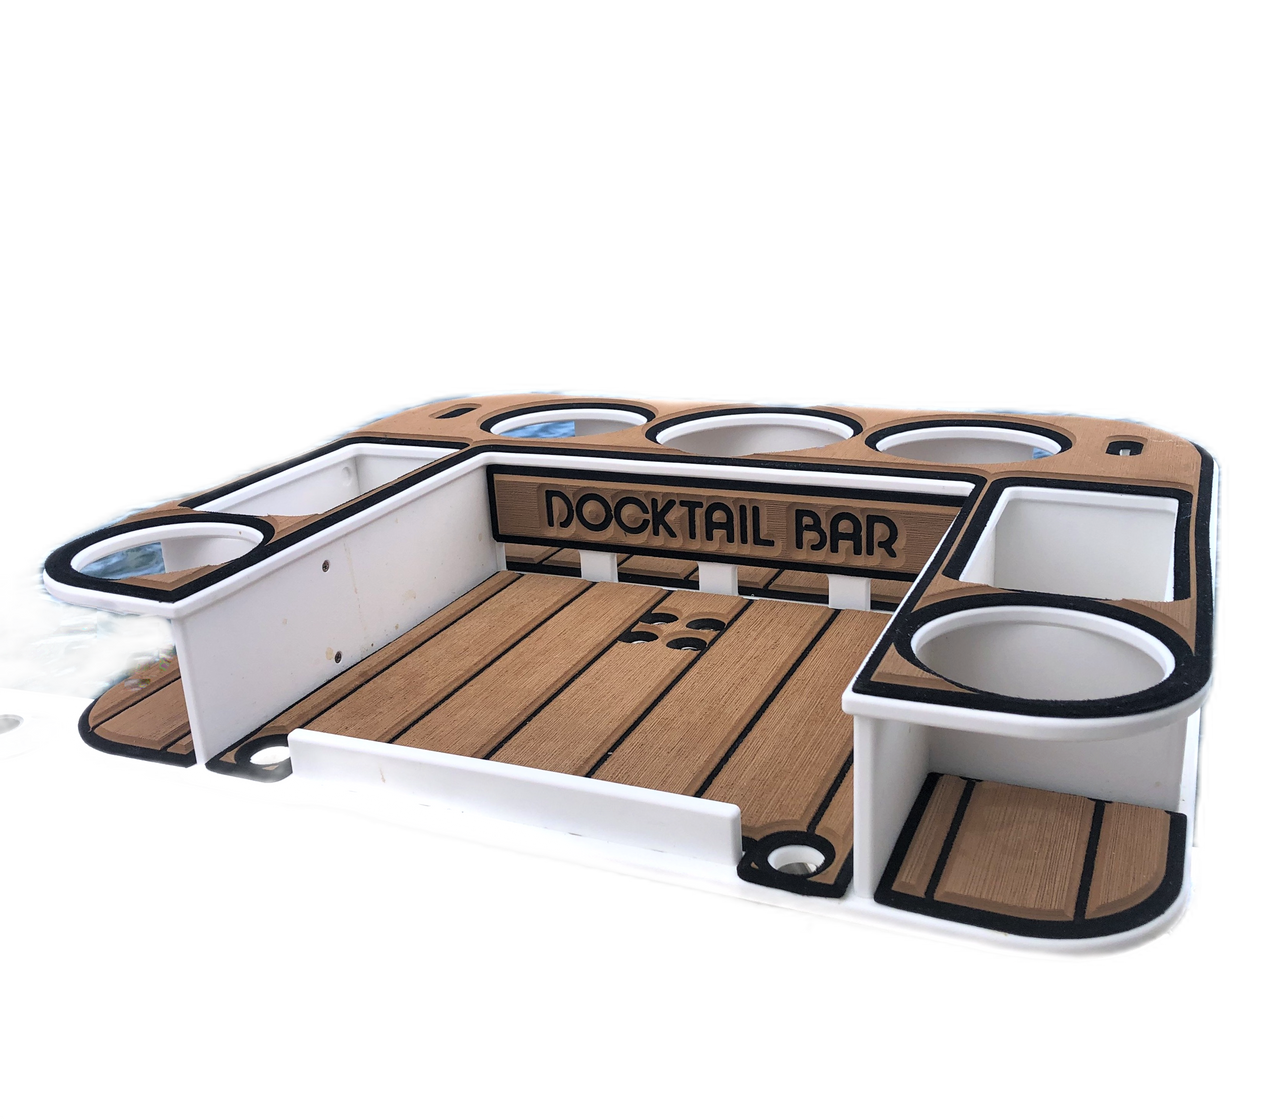 Marine Decking Accessory Kit for The Docktail Butler - Does NOT Include Table or Mount